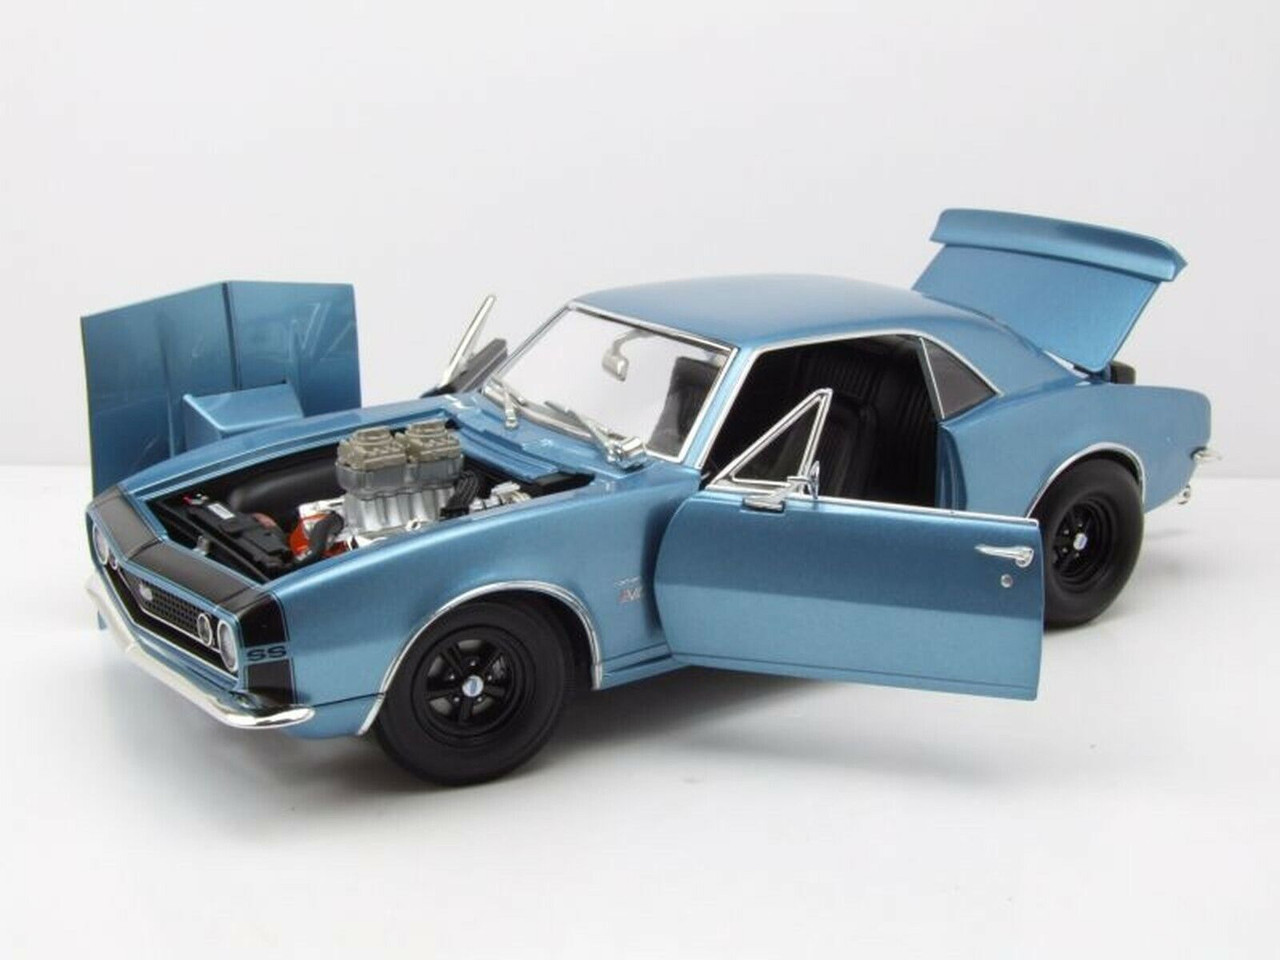 1/18 ACME 1967 Chevrolet Chevy Camaro SS (Blue) Diecast Car Model Nicecar Exclusive Limited 120 Pieces